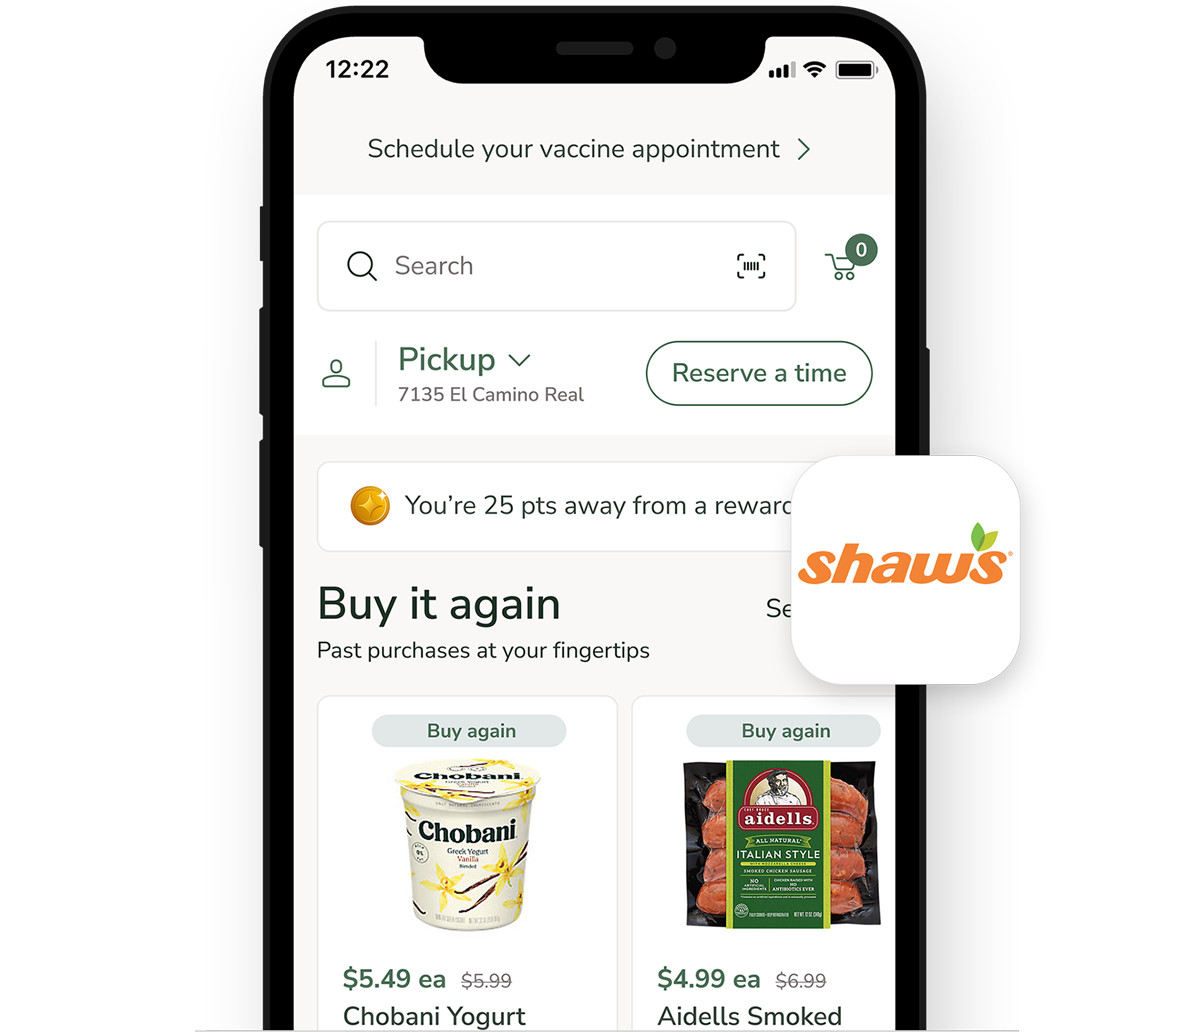 Shaw’s Deals & Delivery app